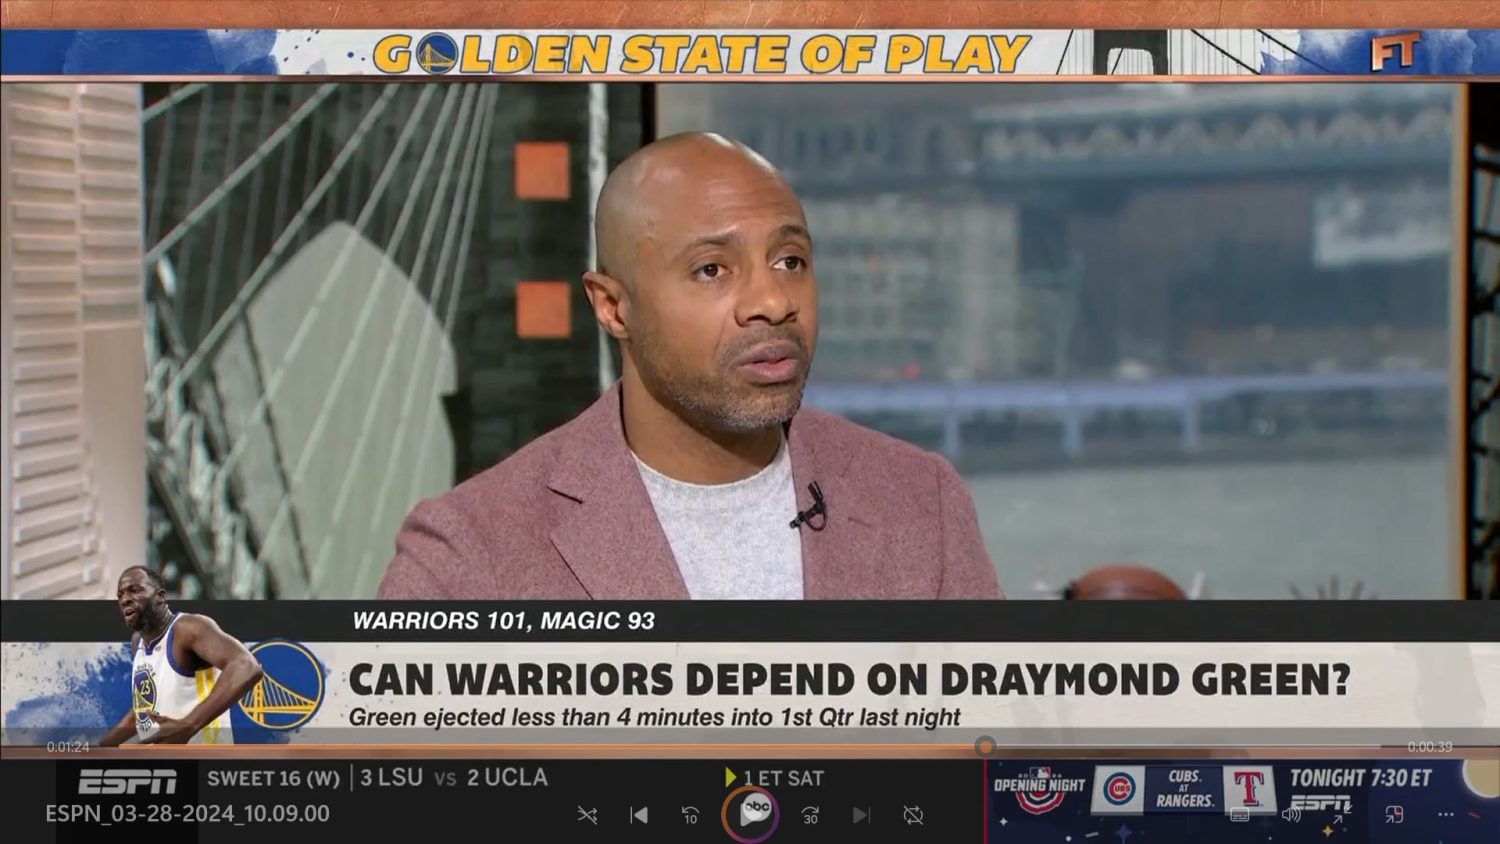 Jay Williams discusses Steph Curry's role in Draymond Green ejection